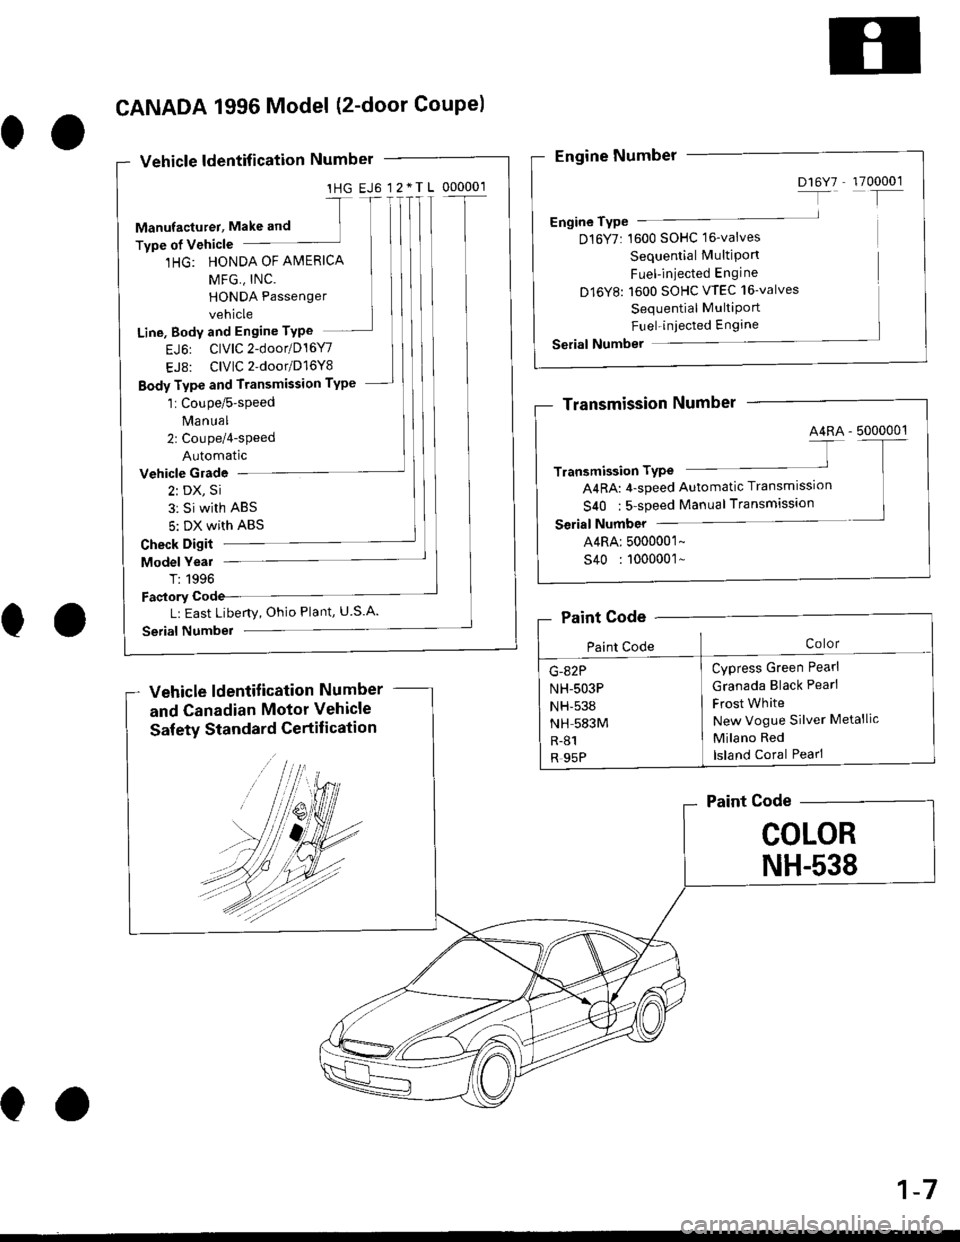 HONDA CIVIC 2000 6.G Workshop Manual 1HG EJ6 12.TL 000001
Line, Body and Engine TYPe
EJ6: ClVlC2-door/D16Y7
EJ8: ClVlC2door/D16Y8
Body Type and Transmission TYPe
Vehicle Glade
2: DX, Si
3: Si with ABS
5: DX with ABS
Check Digit
Model Ye